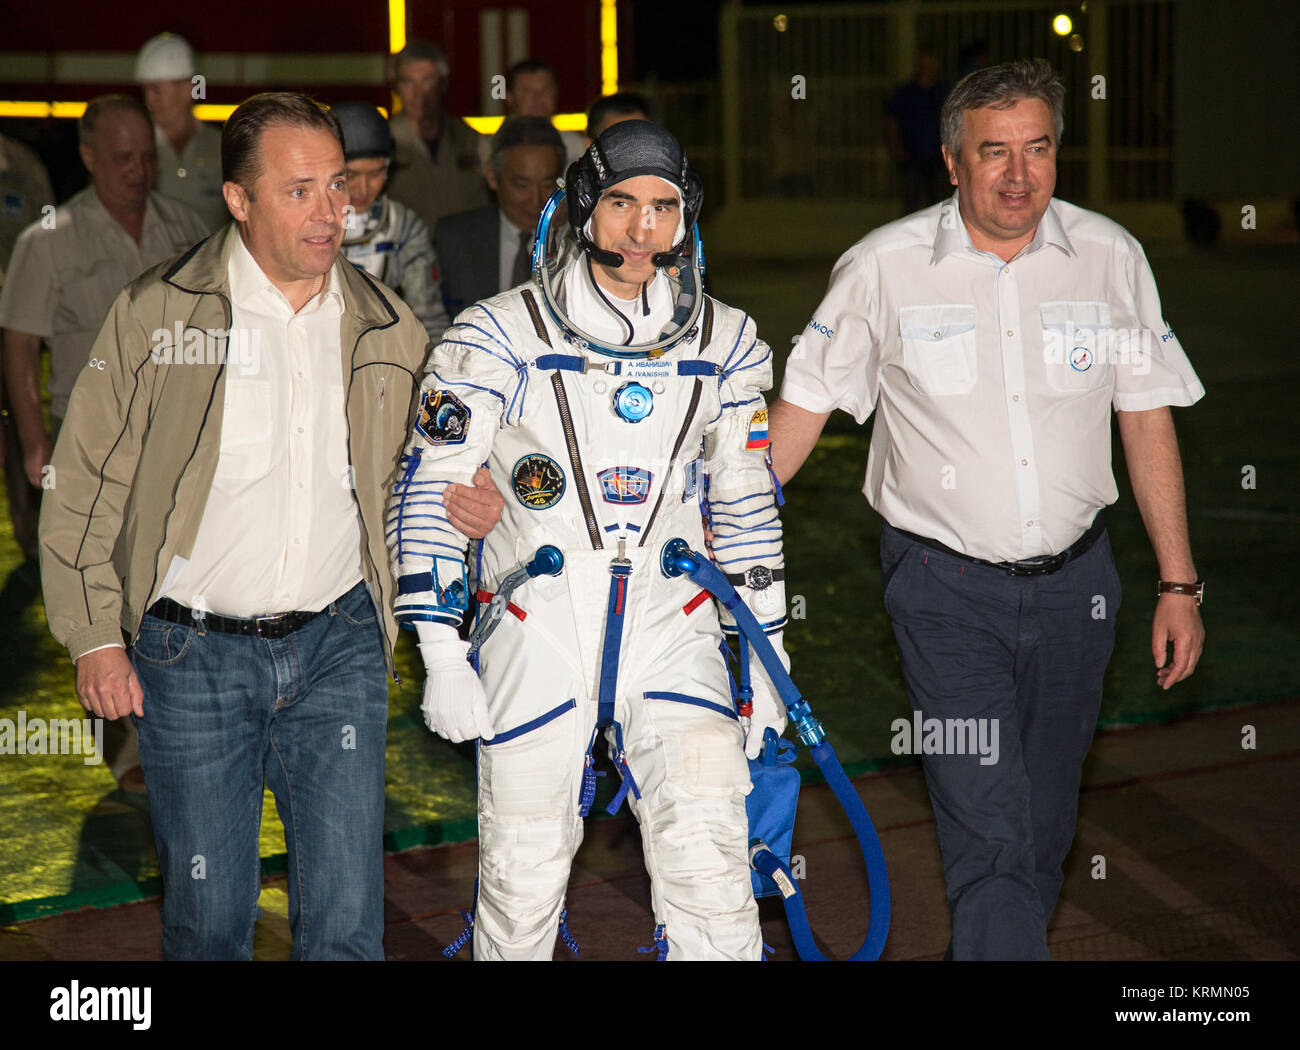 Igor Komarov, Director General of Roscosmos, left, and  Alexander Ivanov, First Deputy Director General, walk with Russian cosmonaut Anatoly Ivanishin of Roscosmos as he prepares to board the Soyuz MS-01 spacecraft with Japanese astronaut Takuya Onishi of the Japan Aerospace Exploration Agency (JAXA), and NASA astronaut Kate Rubins, Thursday, July 7, 2016 at the Baikonur Cosmodrome in Kazakhstan. Rubins, Ivanishin, and Onishi launched from the Baikonur Cosmodrome in Kazakhstan the morning of July 7, Kazakh time (July 6 Eastern time.) All three will spend approximately four months on the orbita Stock Photo